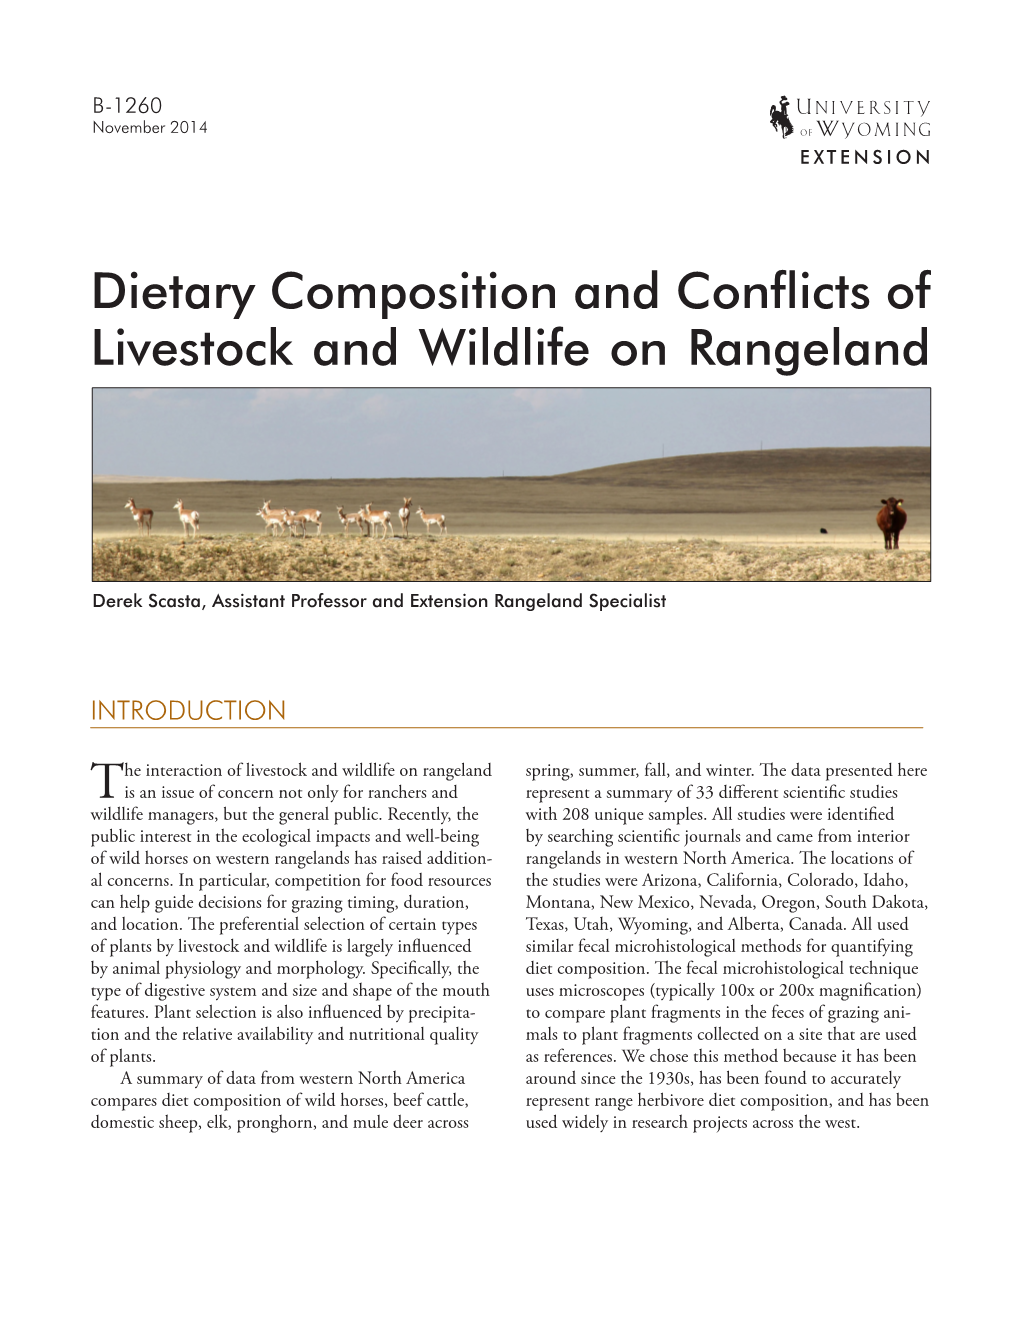 Dietary Composition and Conflicts of Livestock and Wildlife on Rangeland